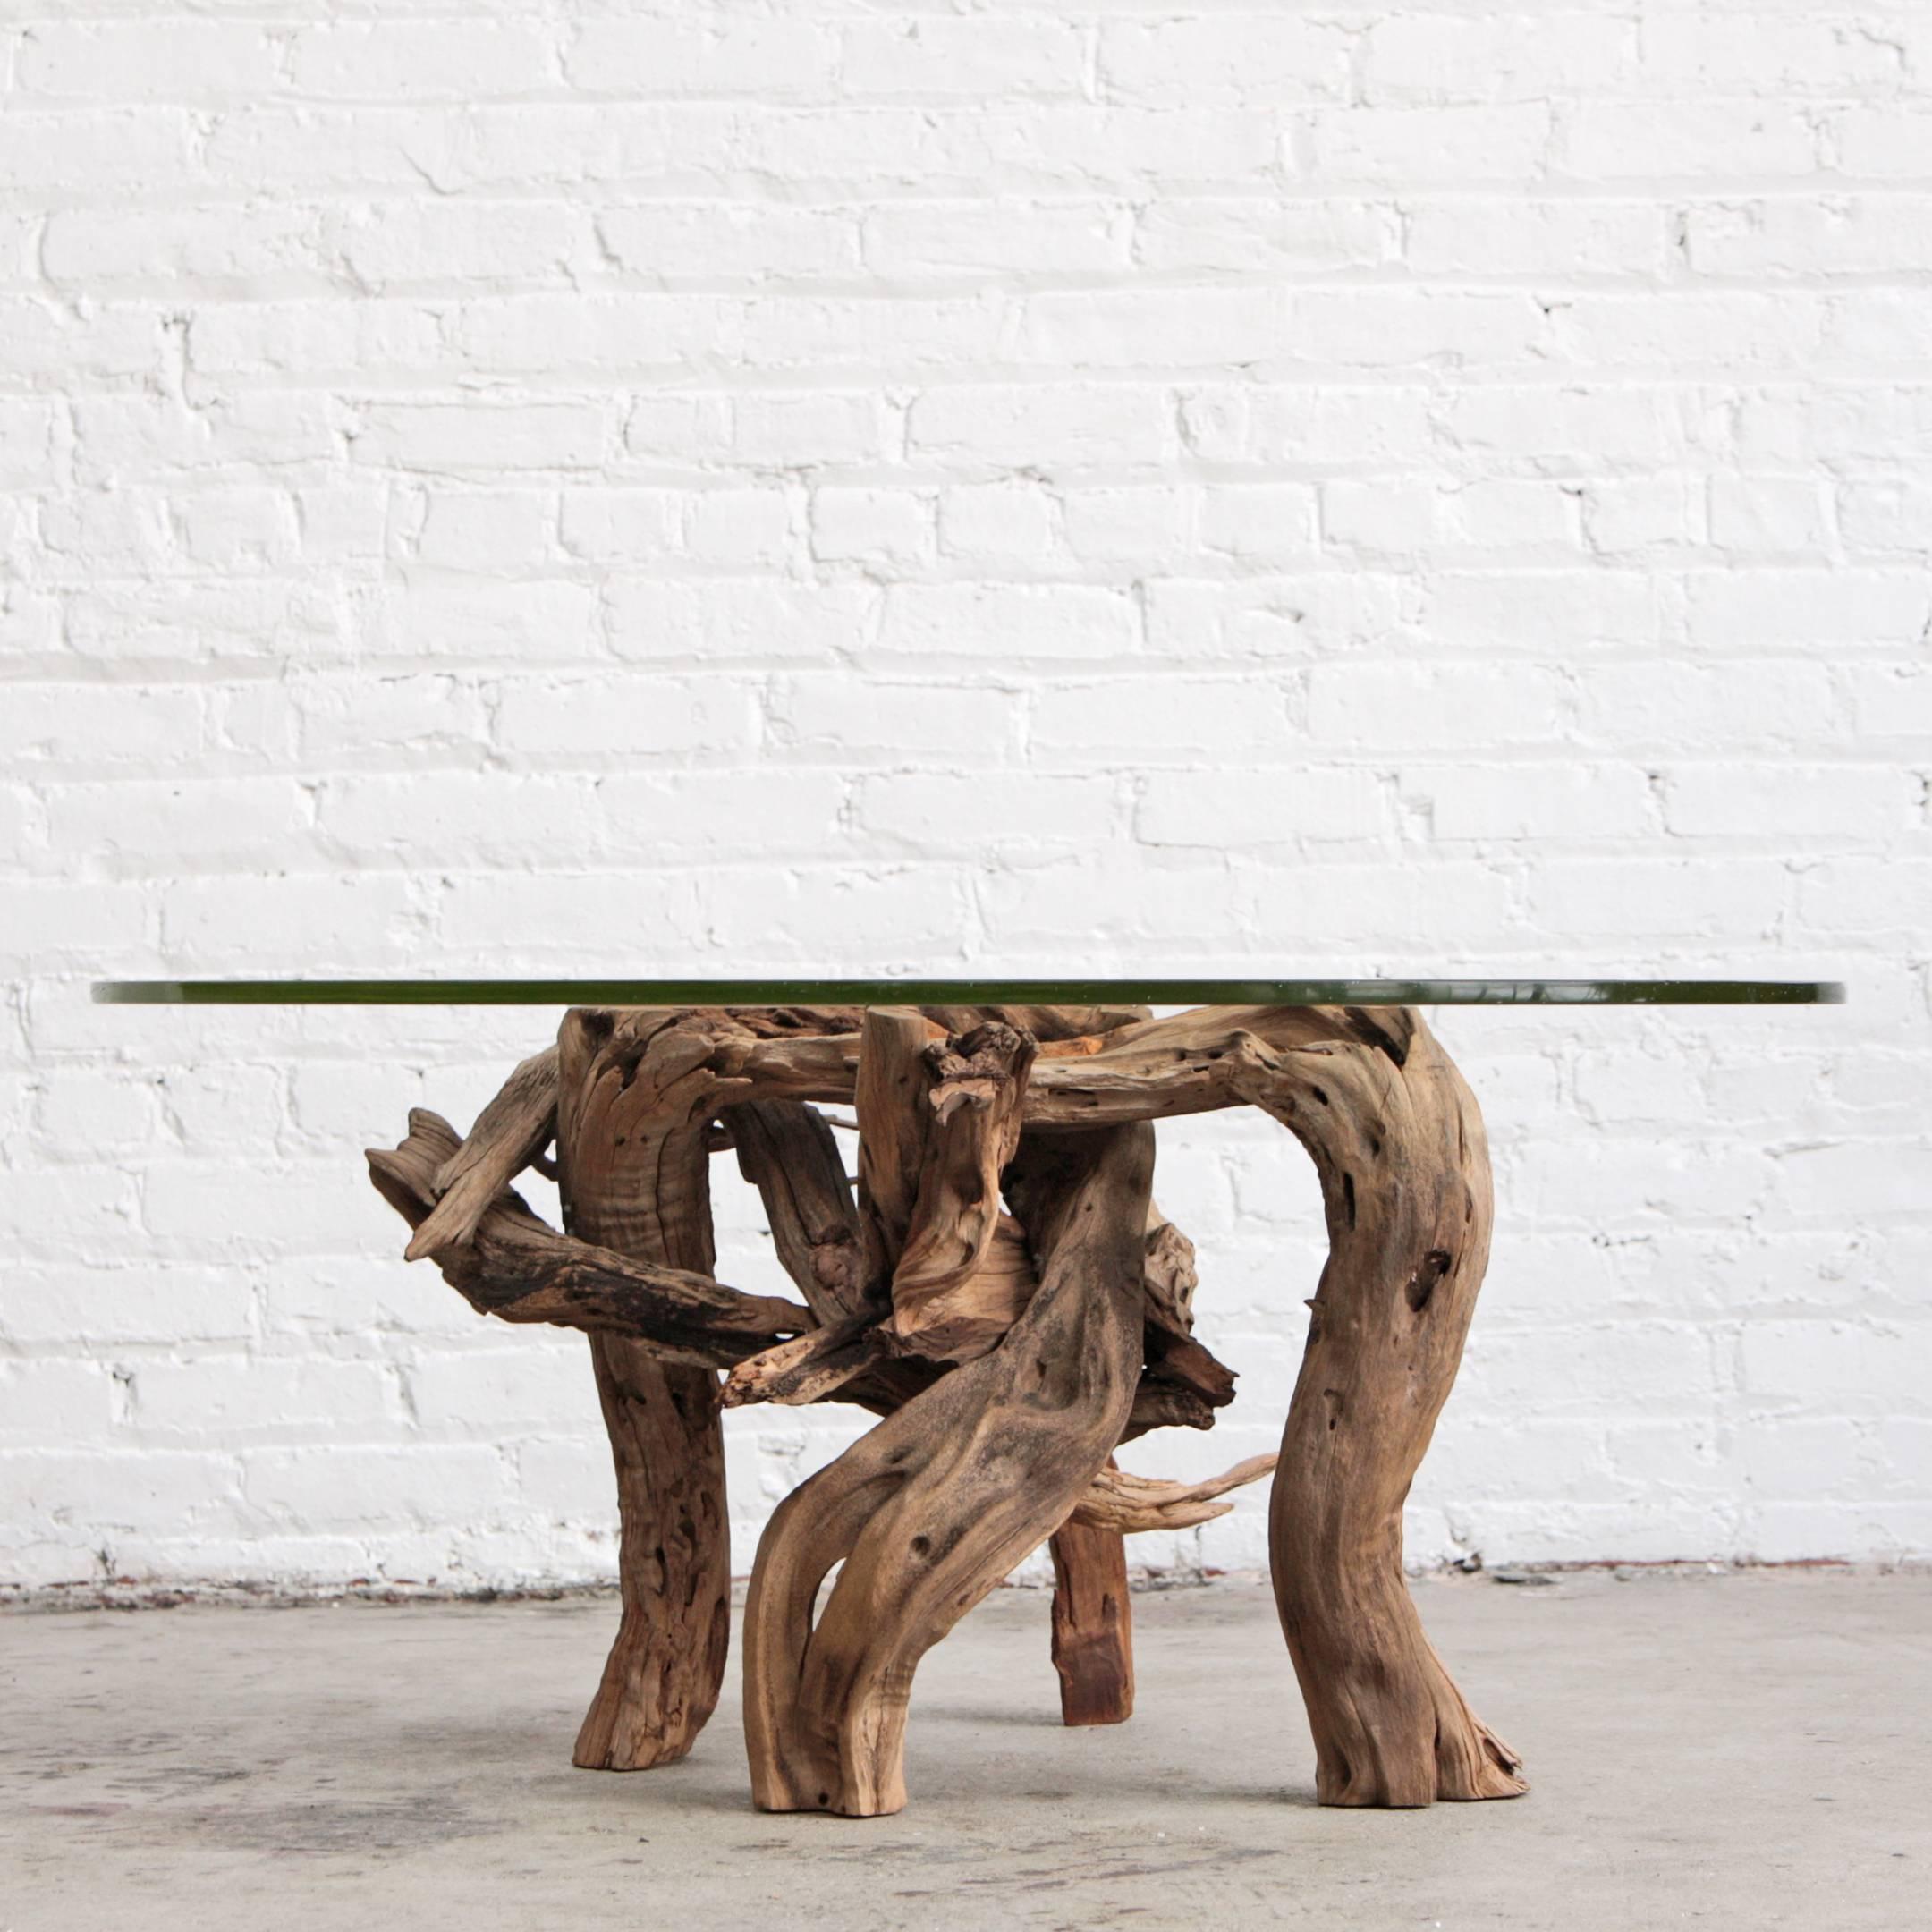 Glass tabletop suspended by a natural driftwood base. free-form organic shape with a modern feel.